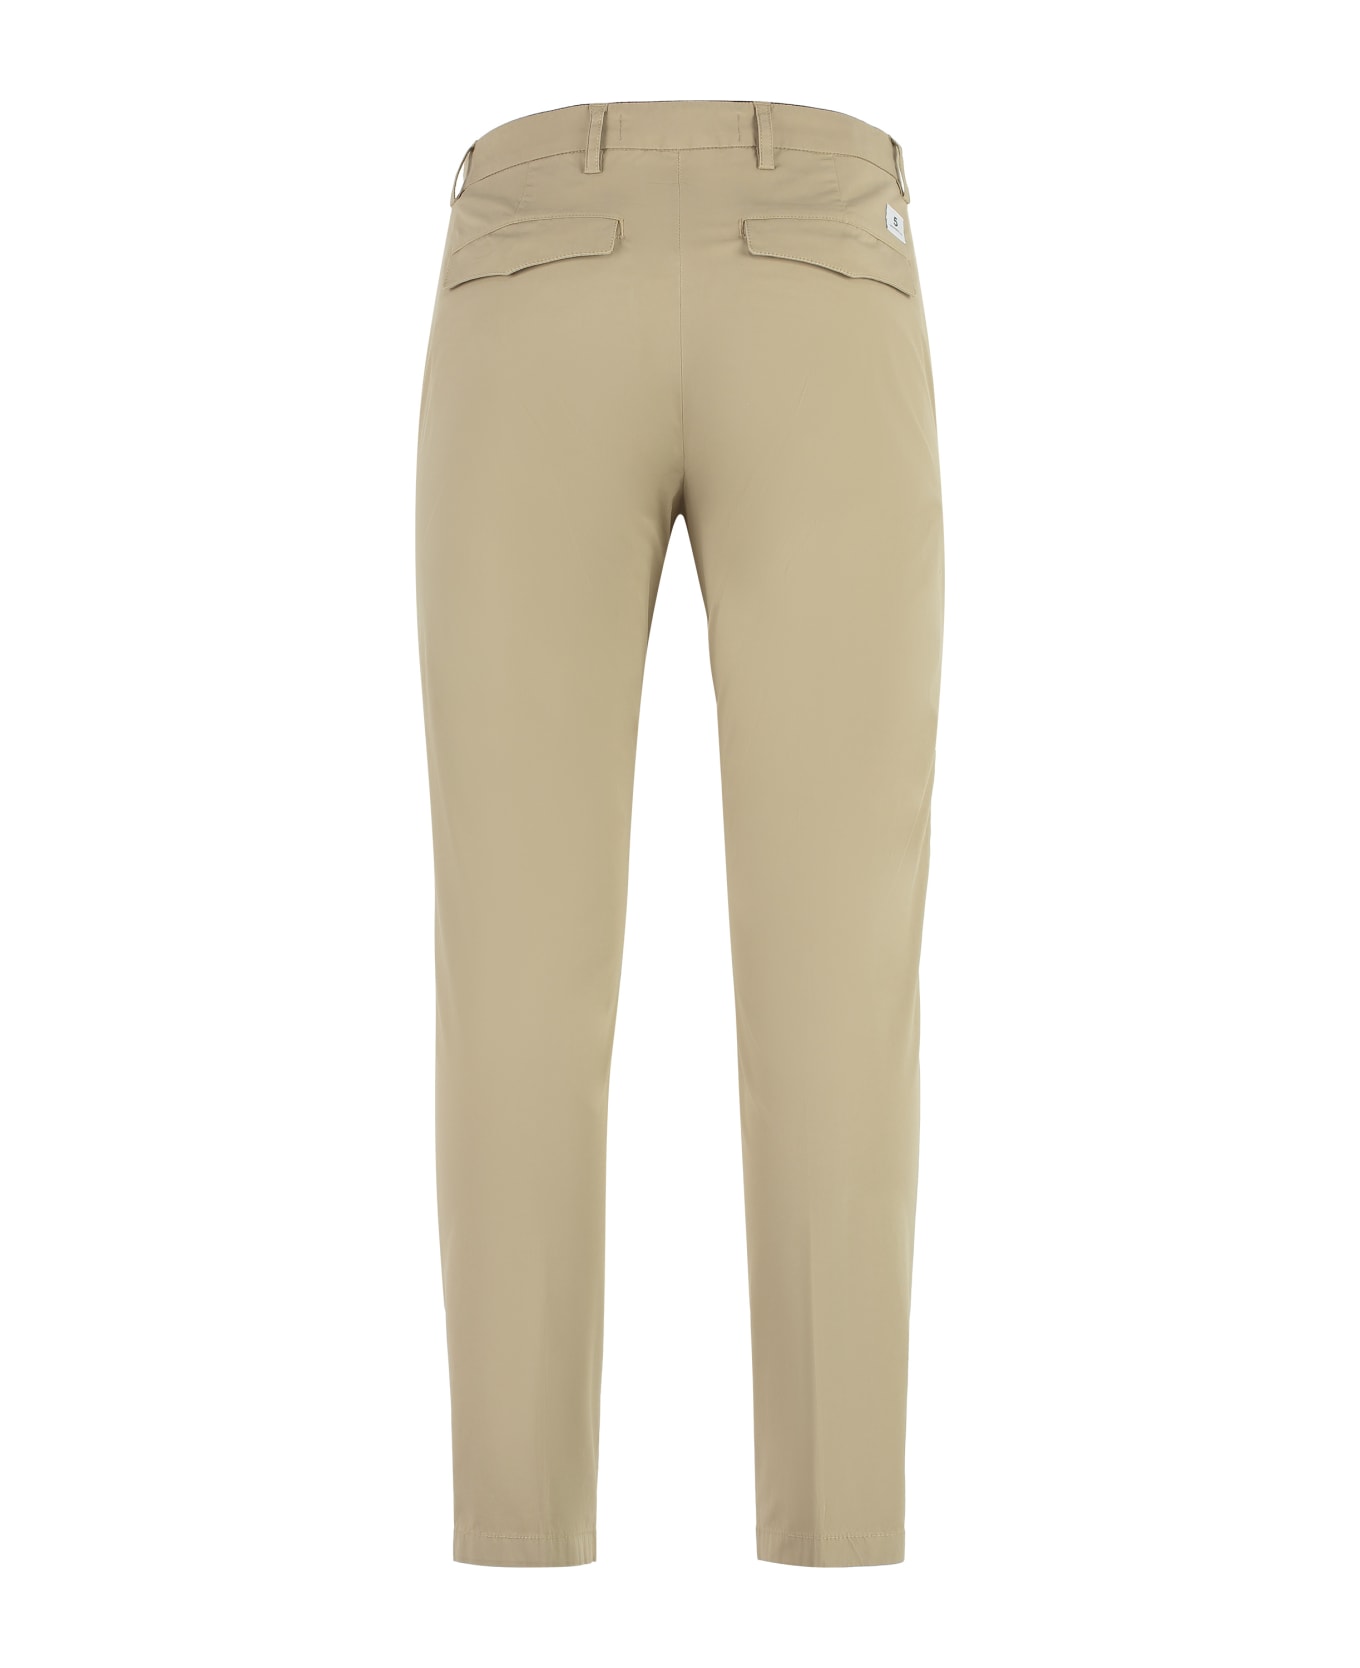 Department Five Prince Chino Pants - Sand